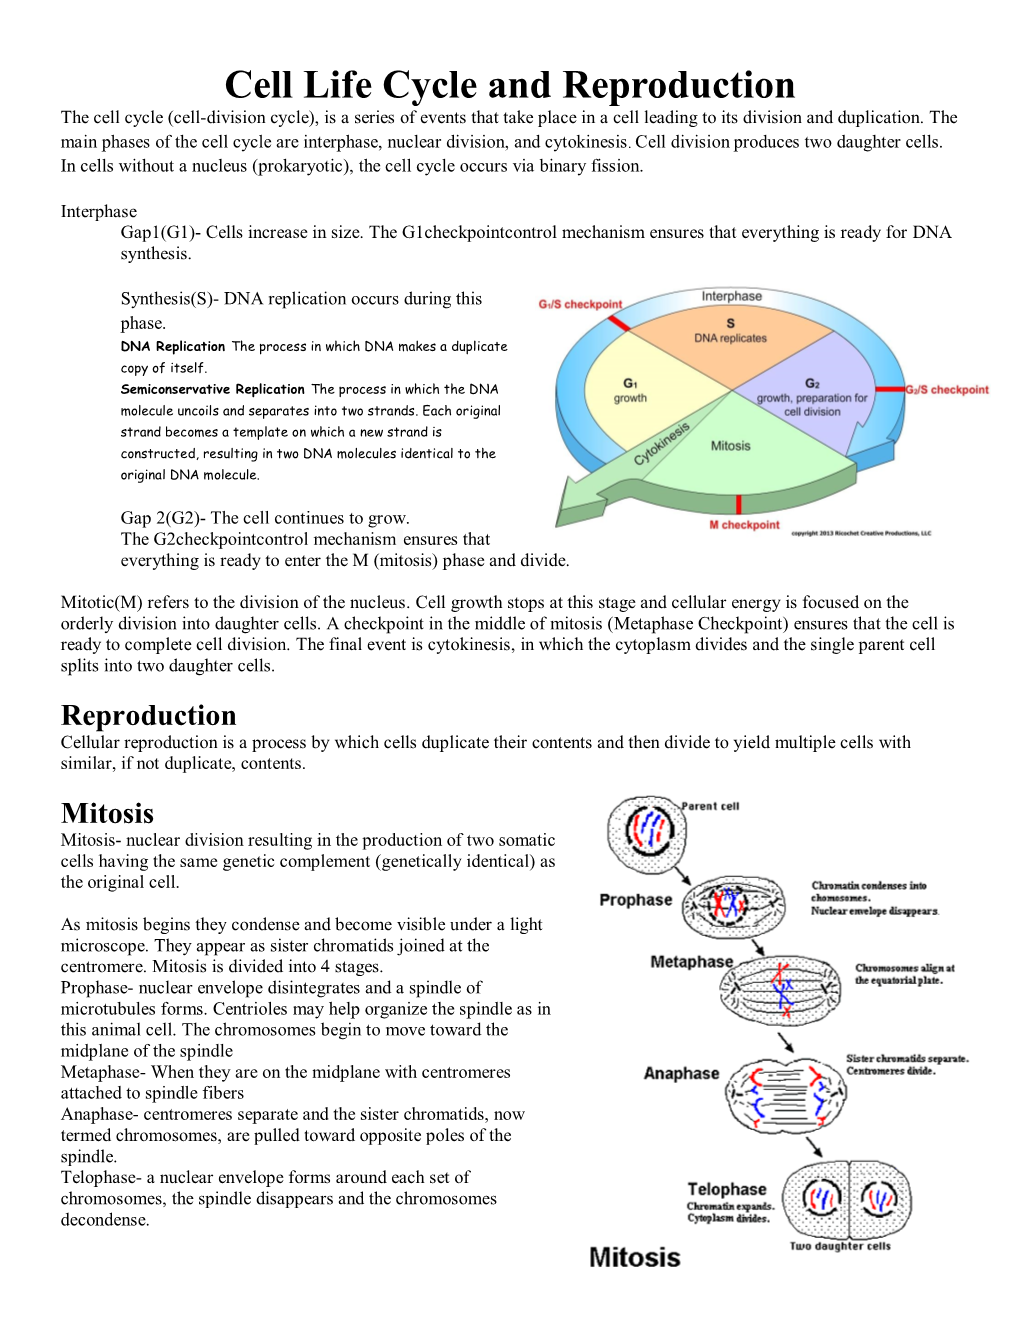 Cell Life Cycle and Reproduction the Cell Cycle (Cell-Division Cycle), Is a Series of Events That Take Place in a Cell Leading to Its Division and Duplication